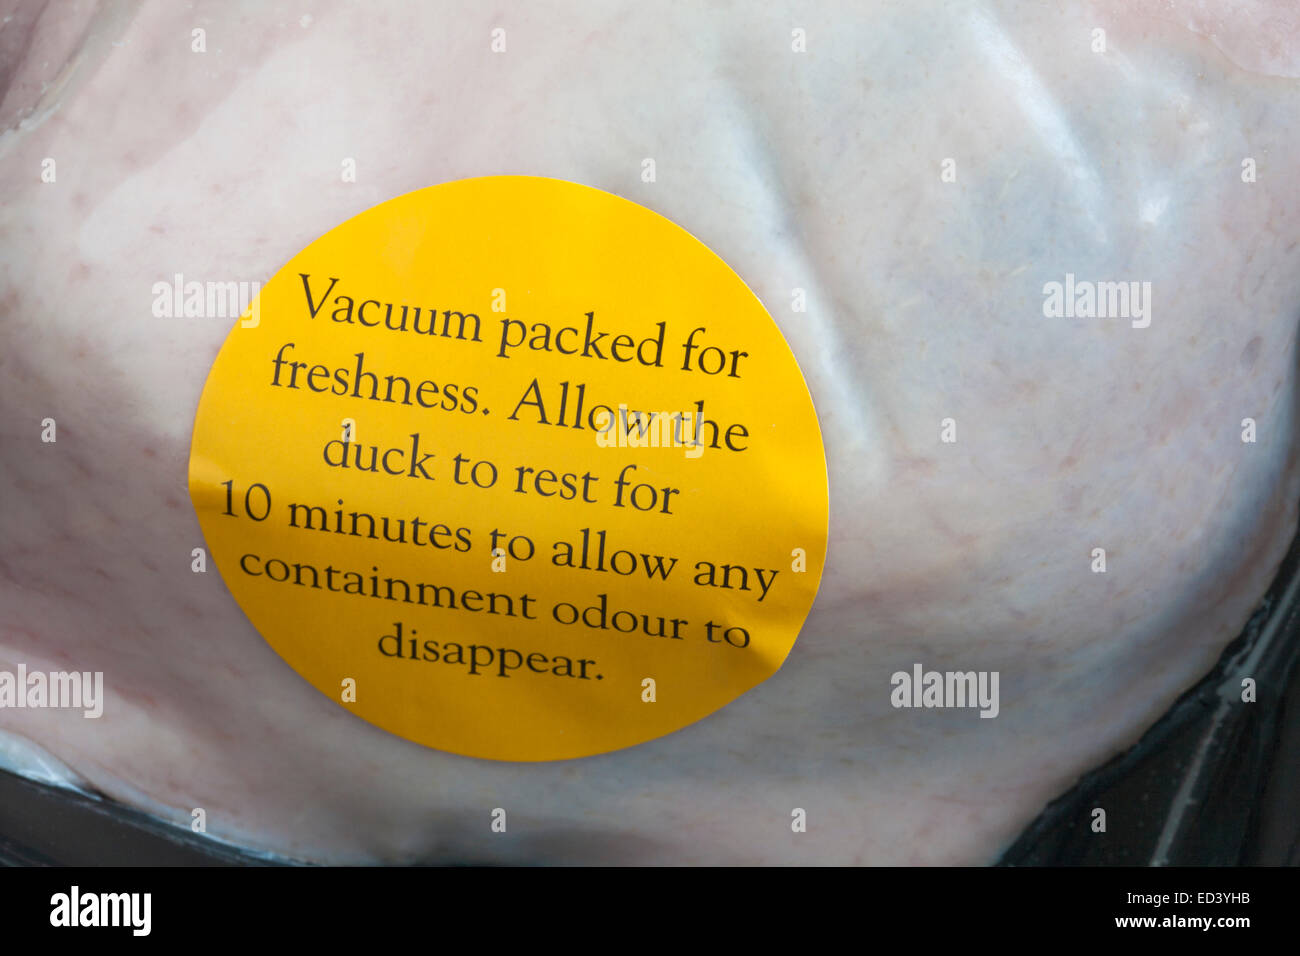 Vacuum packed for freshness label on pack of duck legs Stock Photo